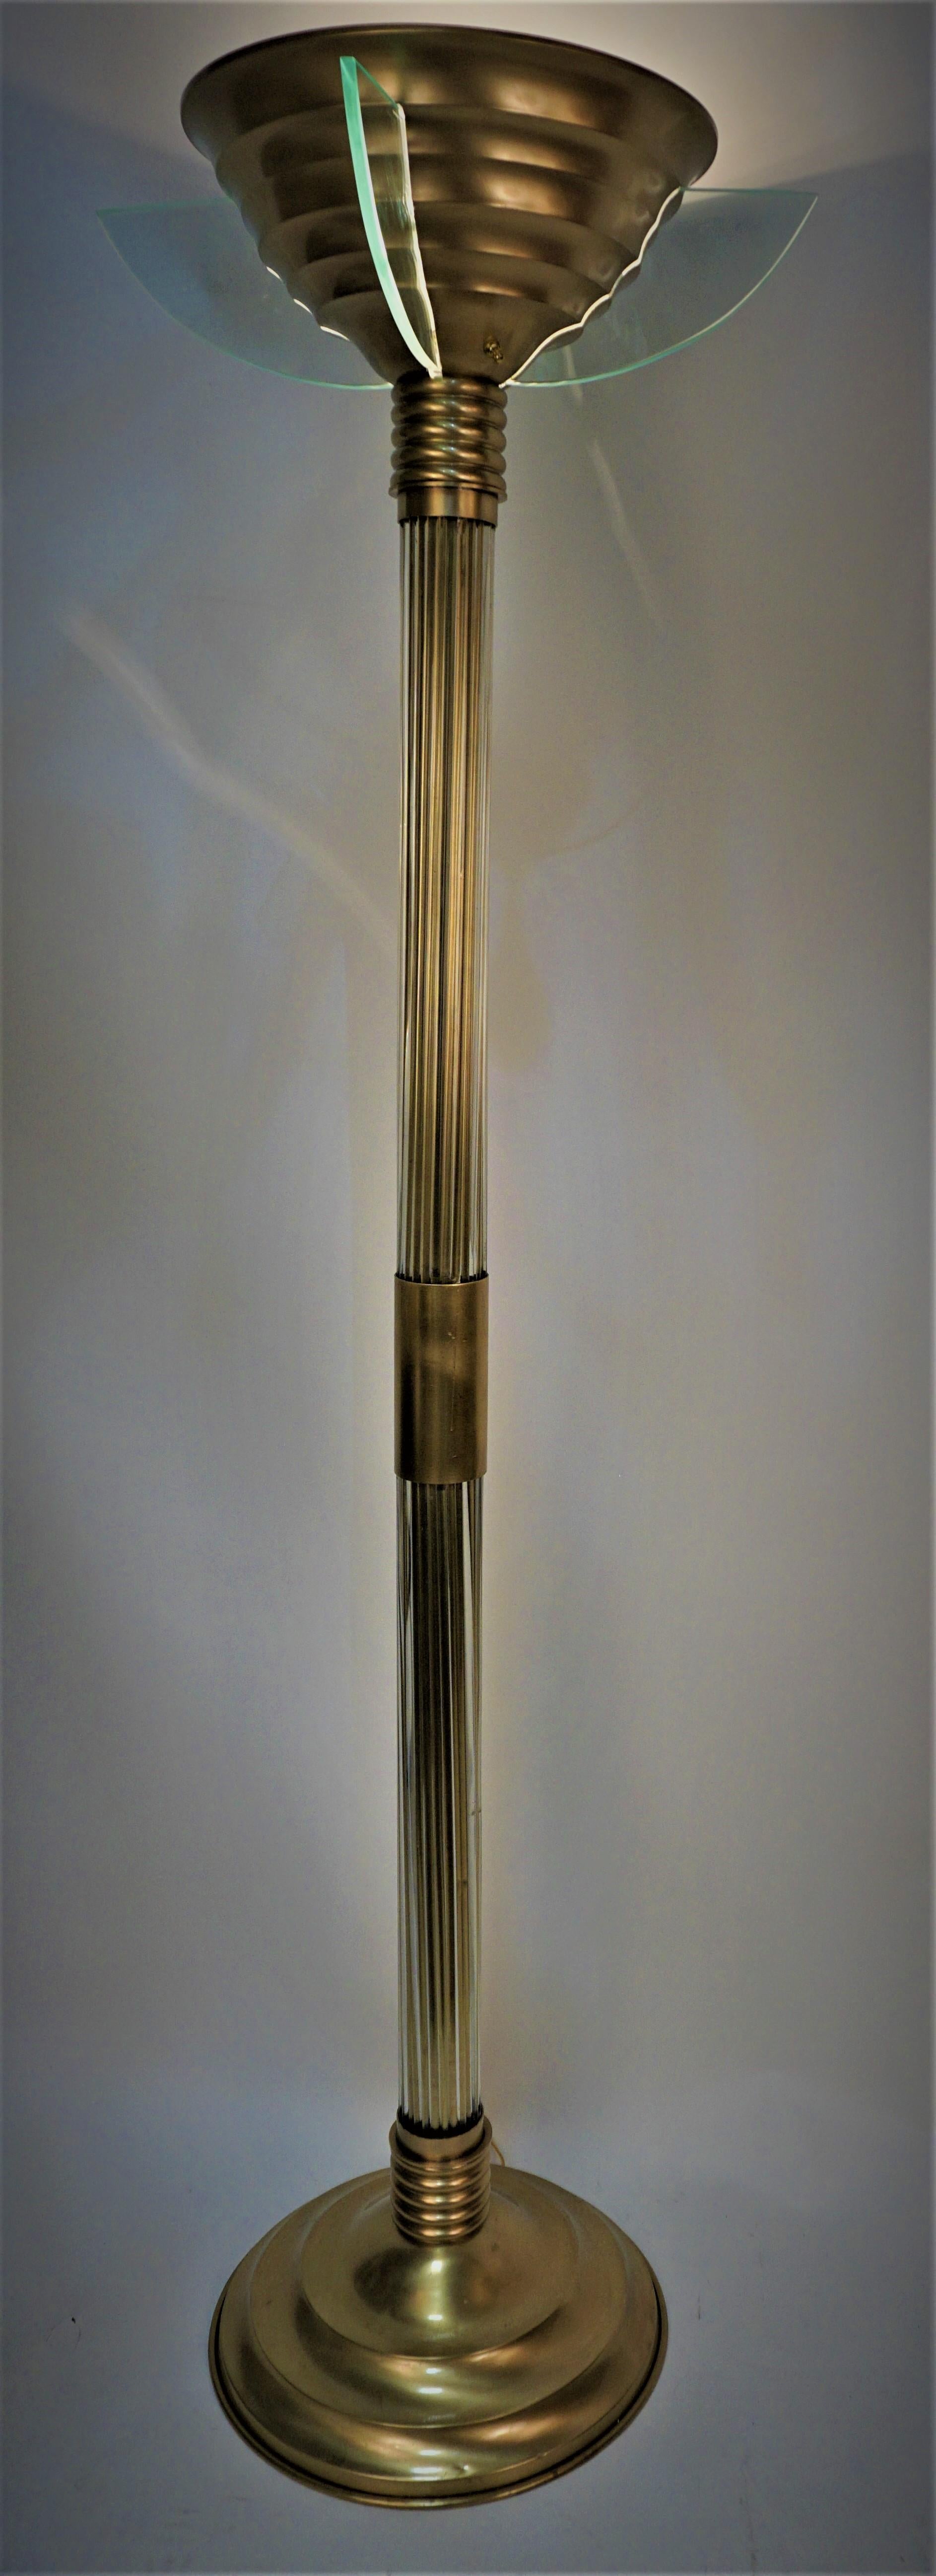 French 1920's Bronze and Glass Art Deco Floor Lamp by Atelier Petitot  For Sale 4